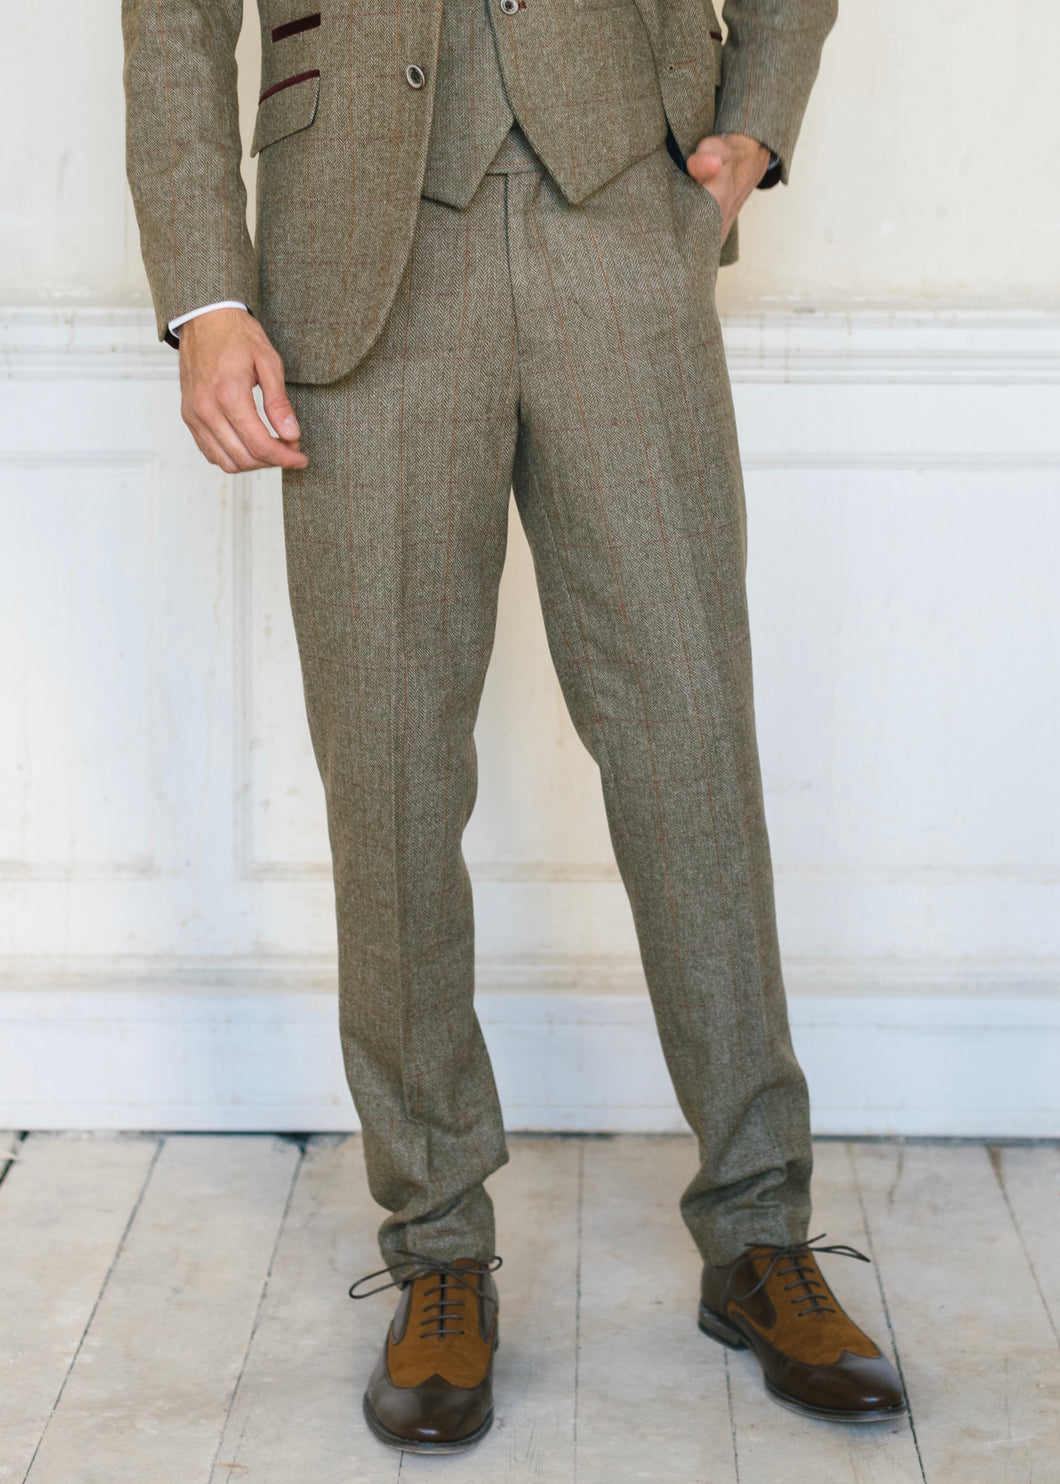 Cavani Gaston Sage Tweed Trousers modelled with brown shoes. Great menswear outfit choice for formal occasions, race days or smart business attire